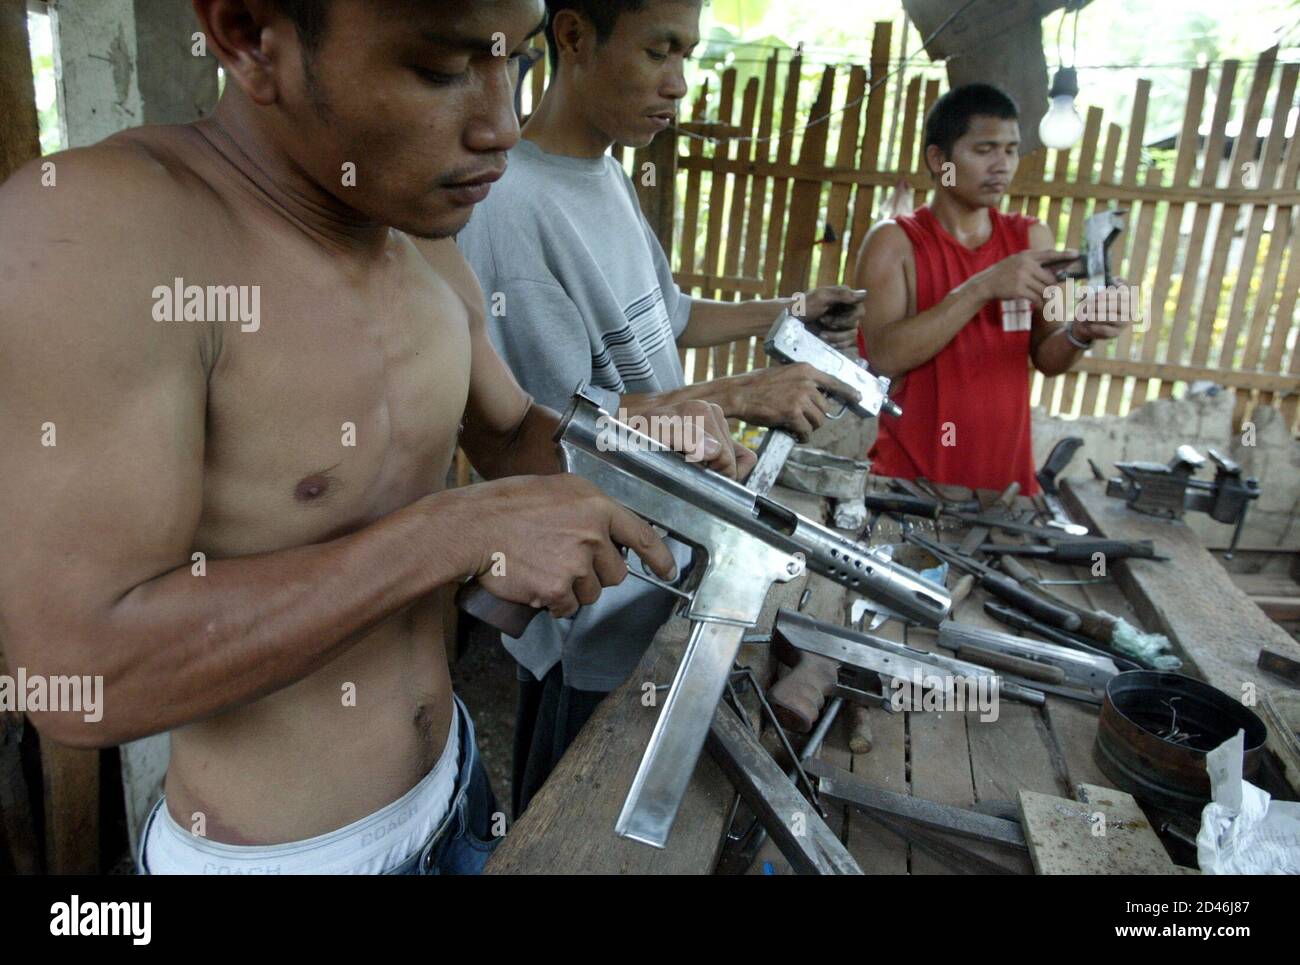 photo-taken-27nov03-filipino-gunsmiths-fine-tune-their-machine-pistols-in-a-clandestine-factory-in-danao-town-in-central-philippines-november-27-2003-illegal-gunmakers-in-the-philippine-island-of-cebu-are-expecting-a-brisk-sales-ahead-of-next-mays-presidential-elections-which-is-shaping-up-to-be-one-of-the-most-bitterlty-fought-polls-on-record-2D46J87.jpg